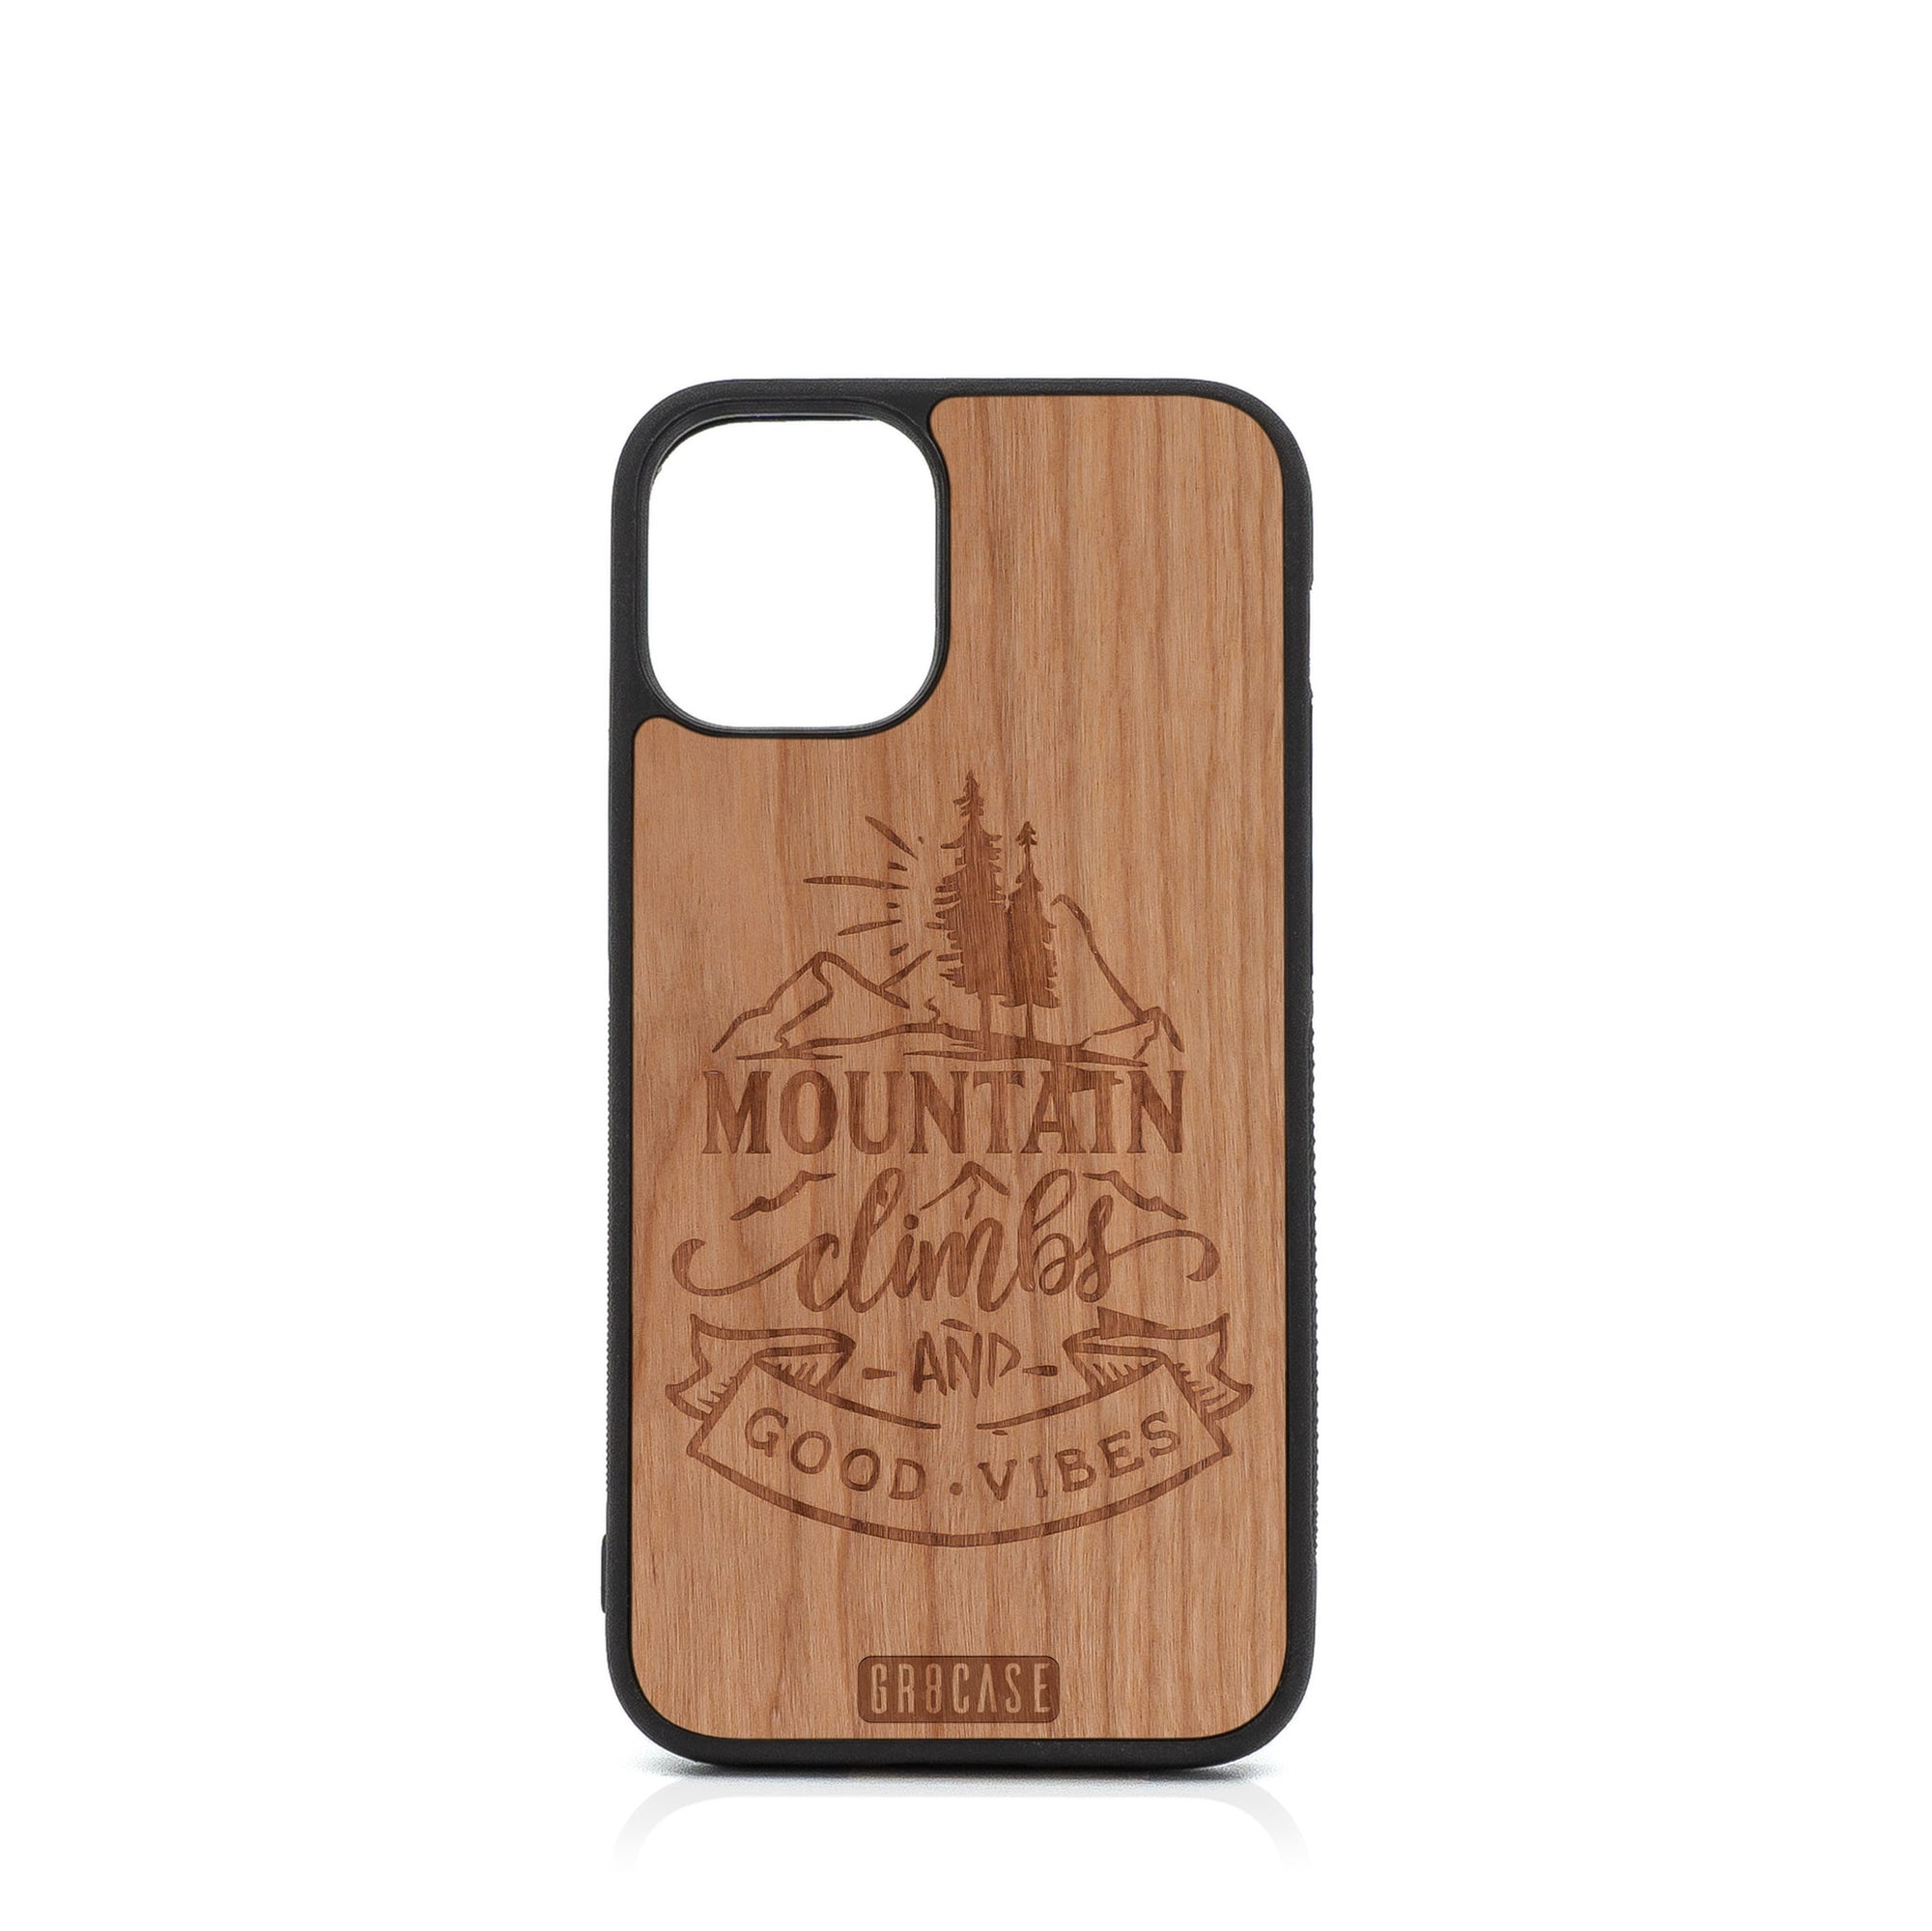 Mountain Climbs And Good Vibes Design Wood Case For iPhone 12 Mini